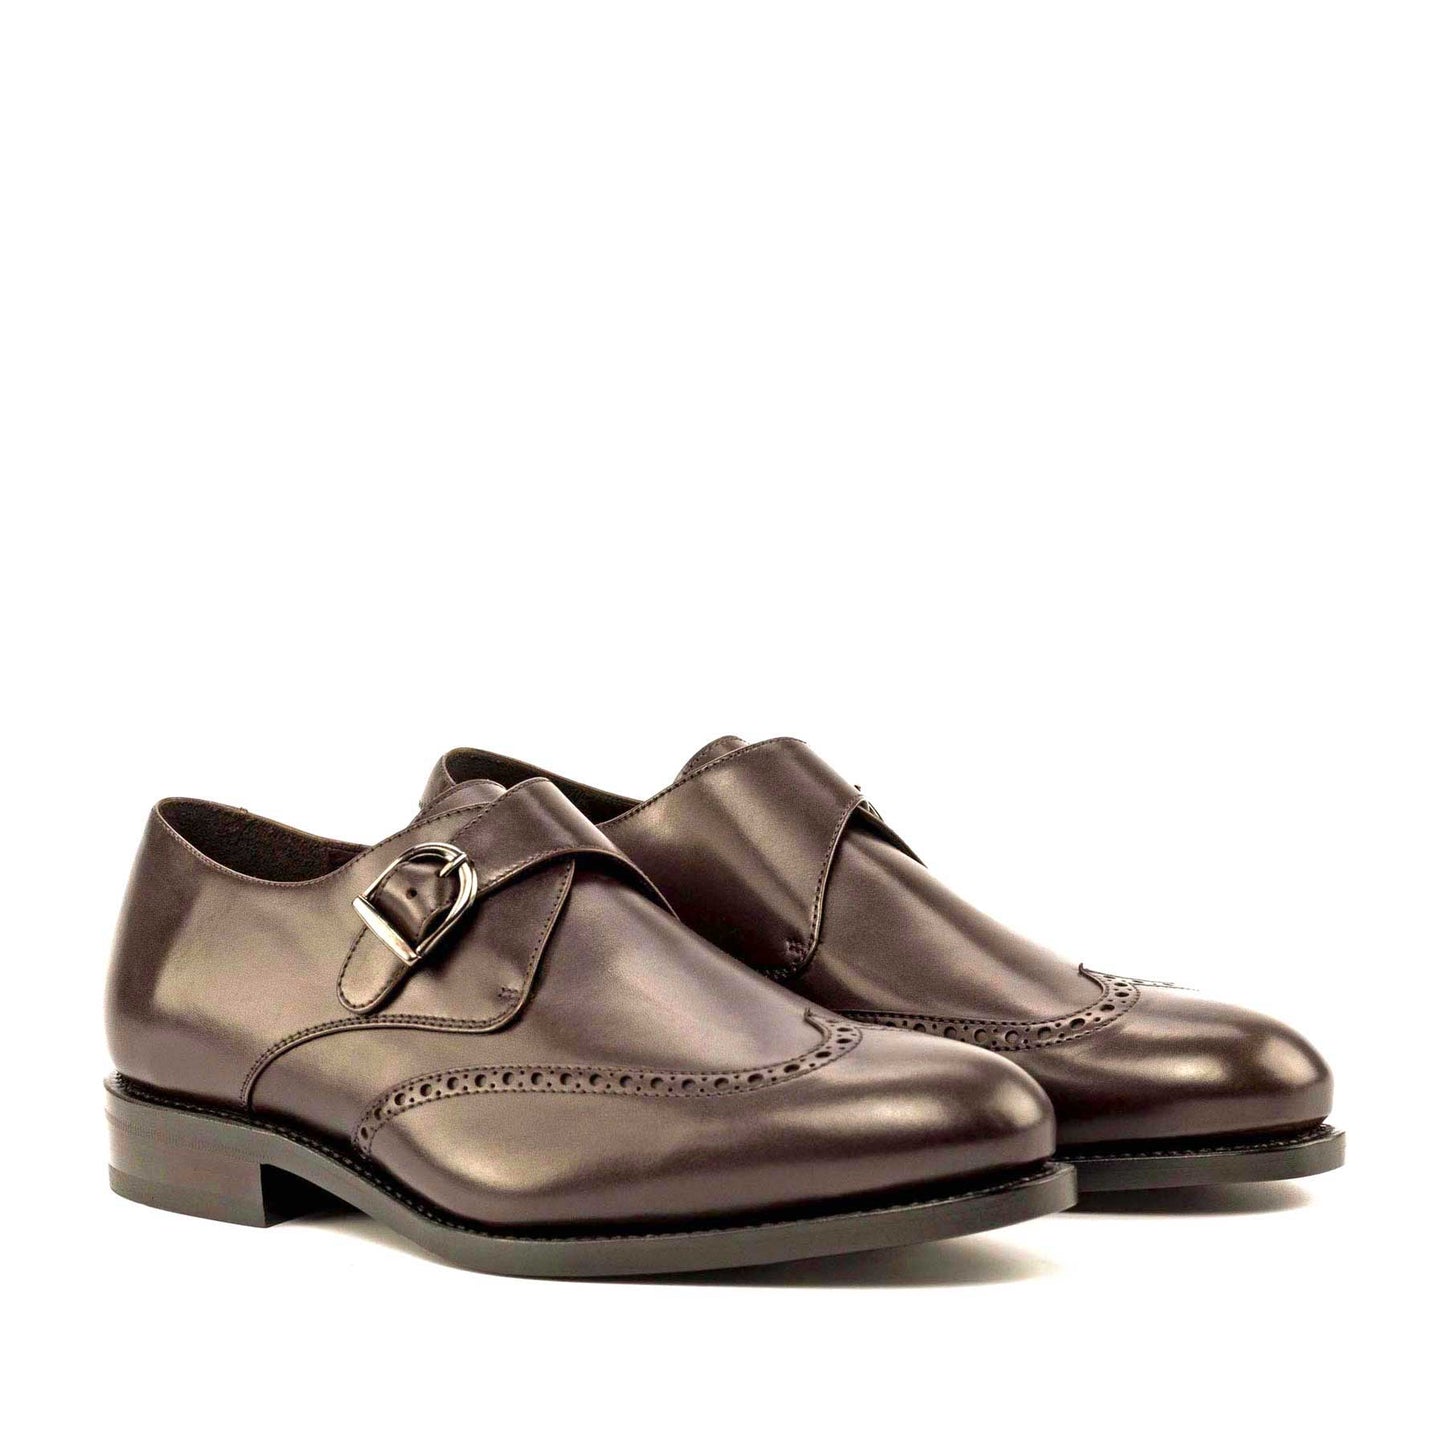 Single Monk in Dark Brown Box Calf - Zatorres | Free Shipping on orders over $200